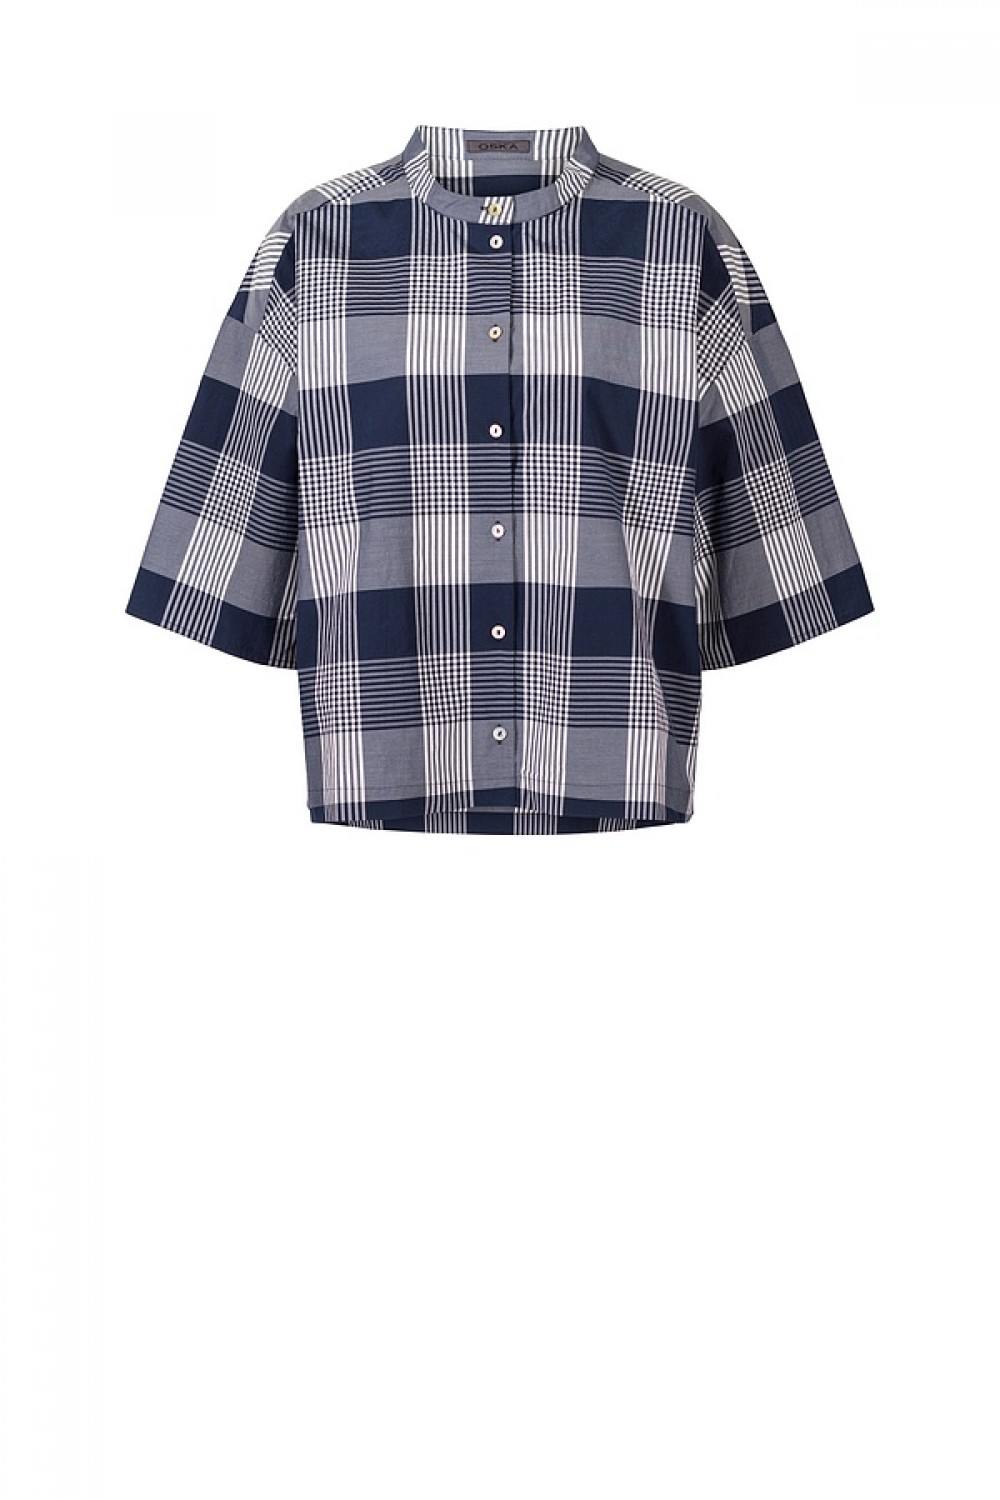 OSKA Blouse 419 Night / Cotton Blend with Gingham Check